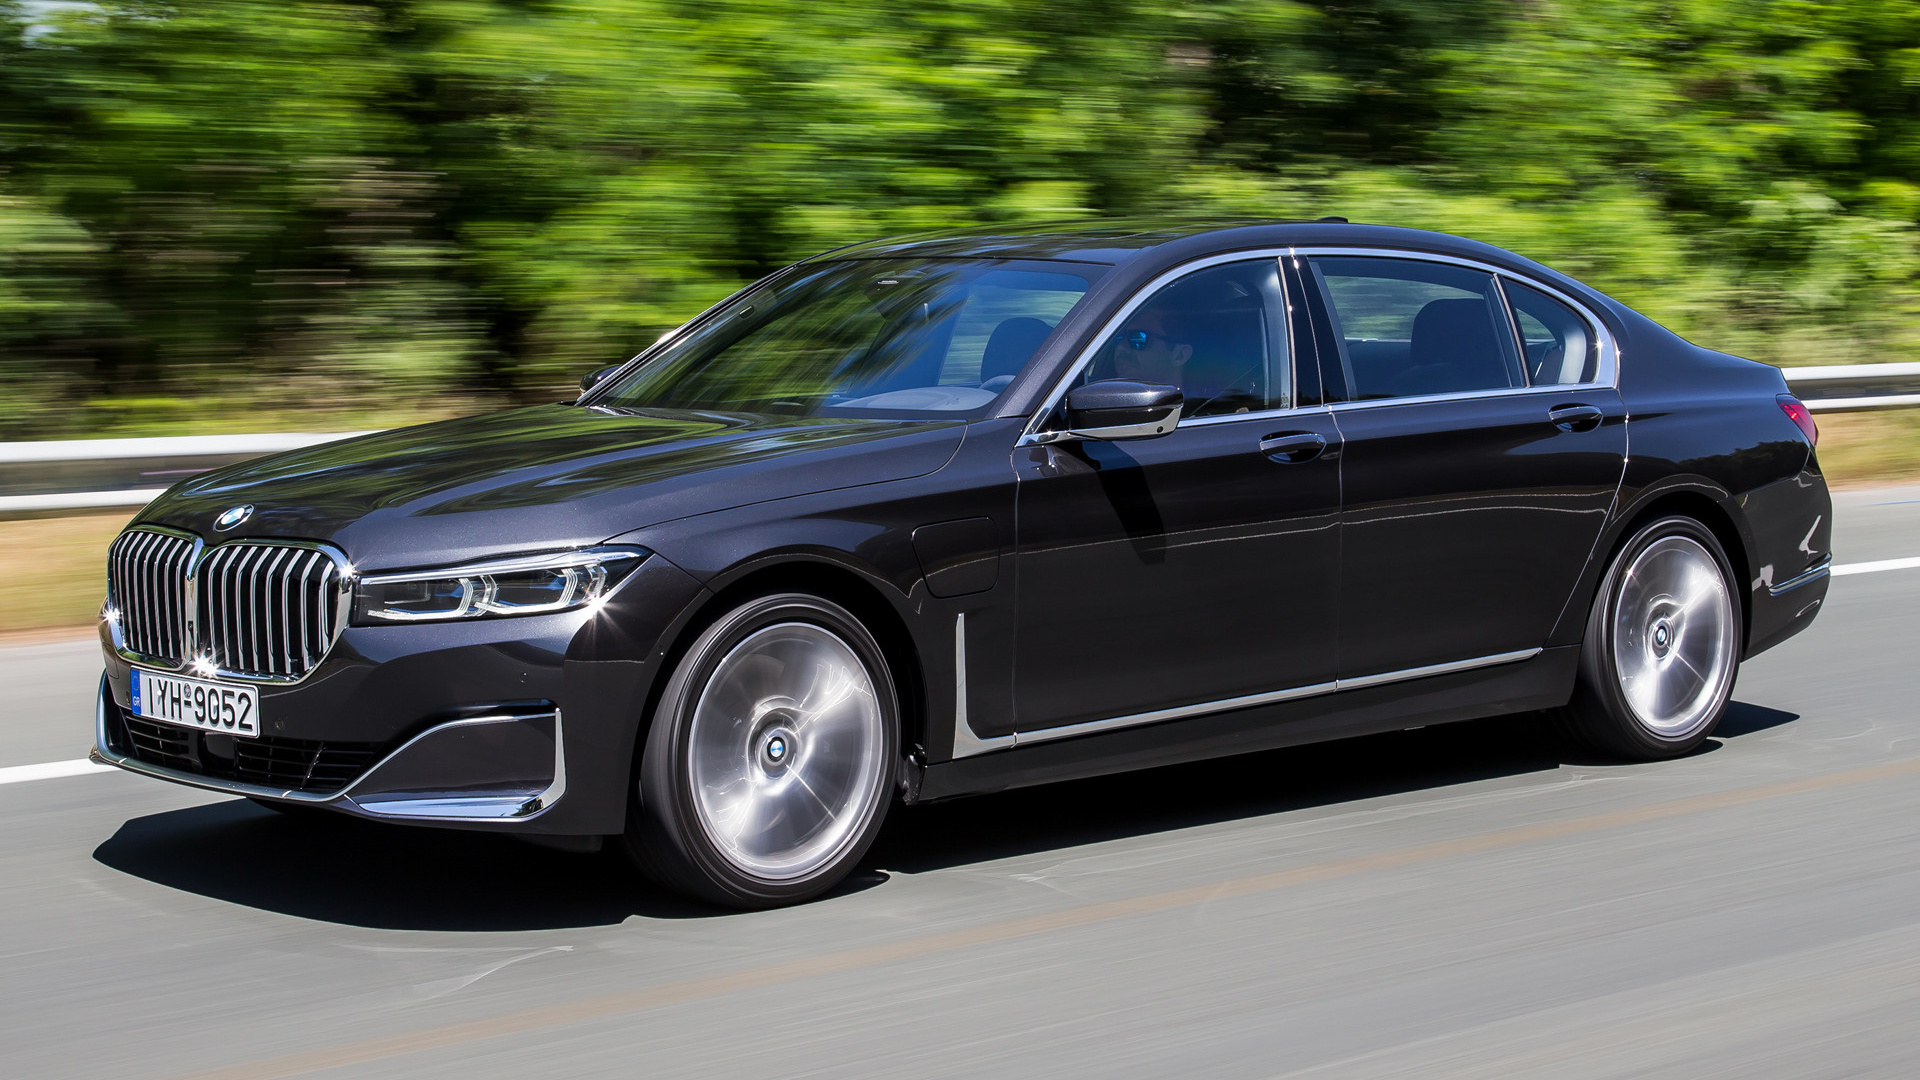 2019 BMW 7 Series Plug-In Hybrid [LWB] - Wallpapers and HD Images | Car ...